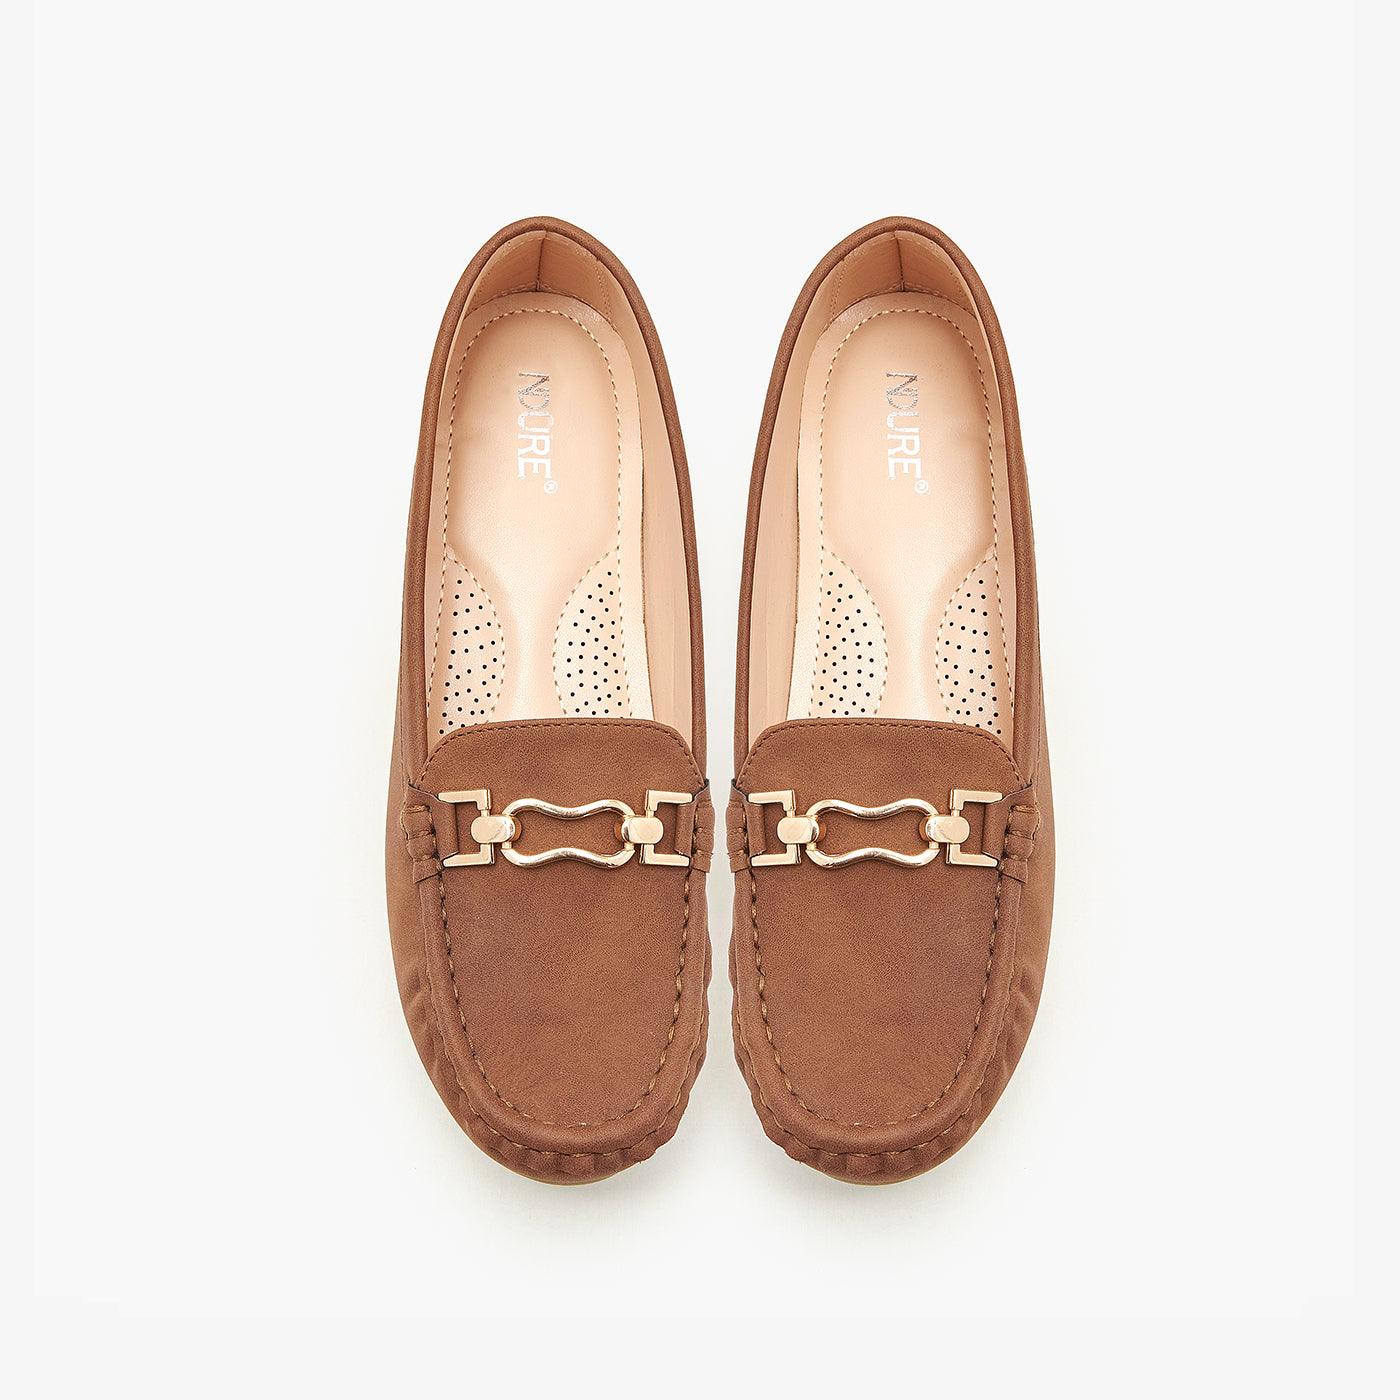 Women's Buckled Moccasins